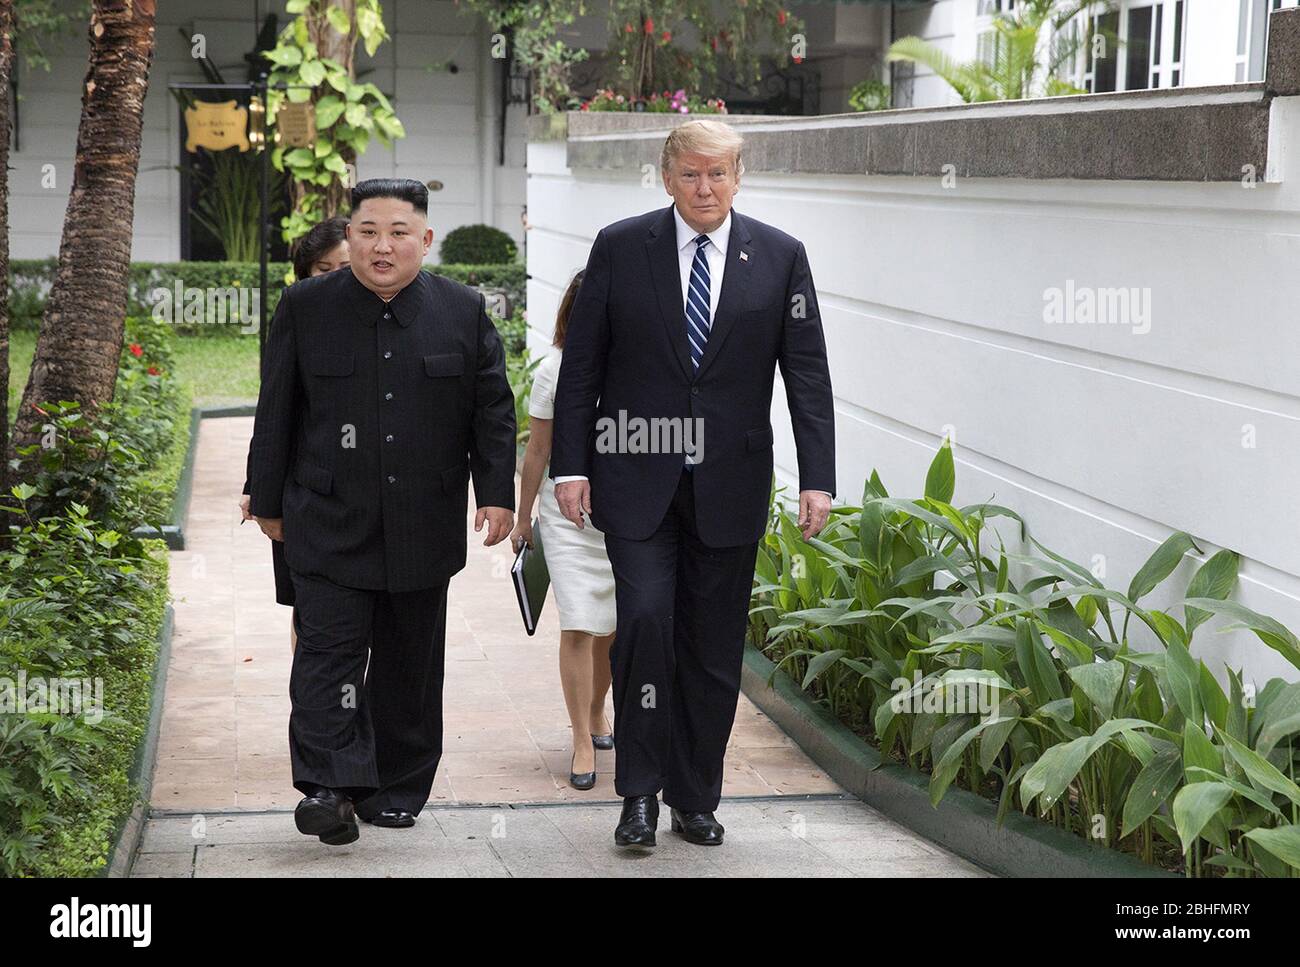 Hanoi, Vietnam. 27th Feb, 2019. President Donald J. Trump and Kim Jong Un, Chairman of the State Affairs Commission of the Democratic PeopleÕs Republic of Korea, walk together on the pool patio Thursday, Feb. 28, 2019, at the Sofitel Legend Metropole hotel in Hanoi, prior to participating in an expanded bilateral meeting. People: President Donald Trump, Kim Jong Un Credit: Storms Media Group/Alamy Live News Stock Photo